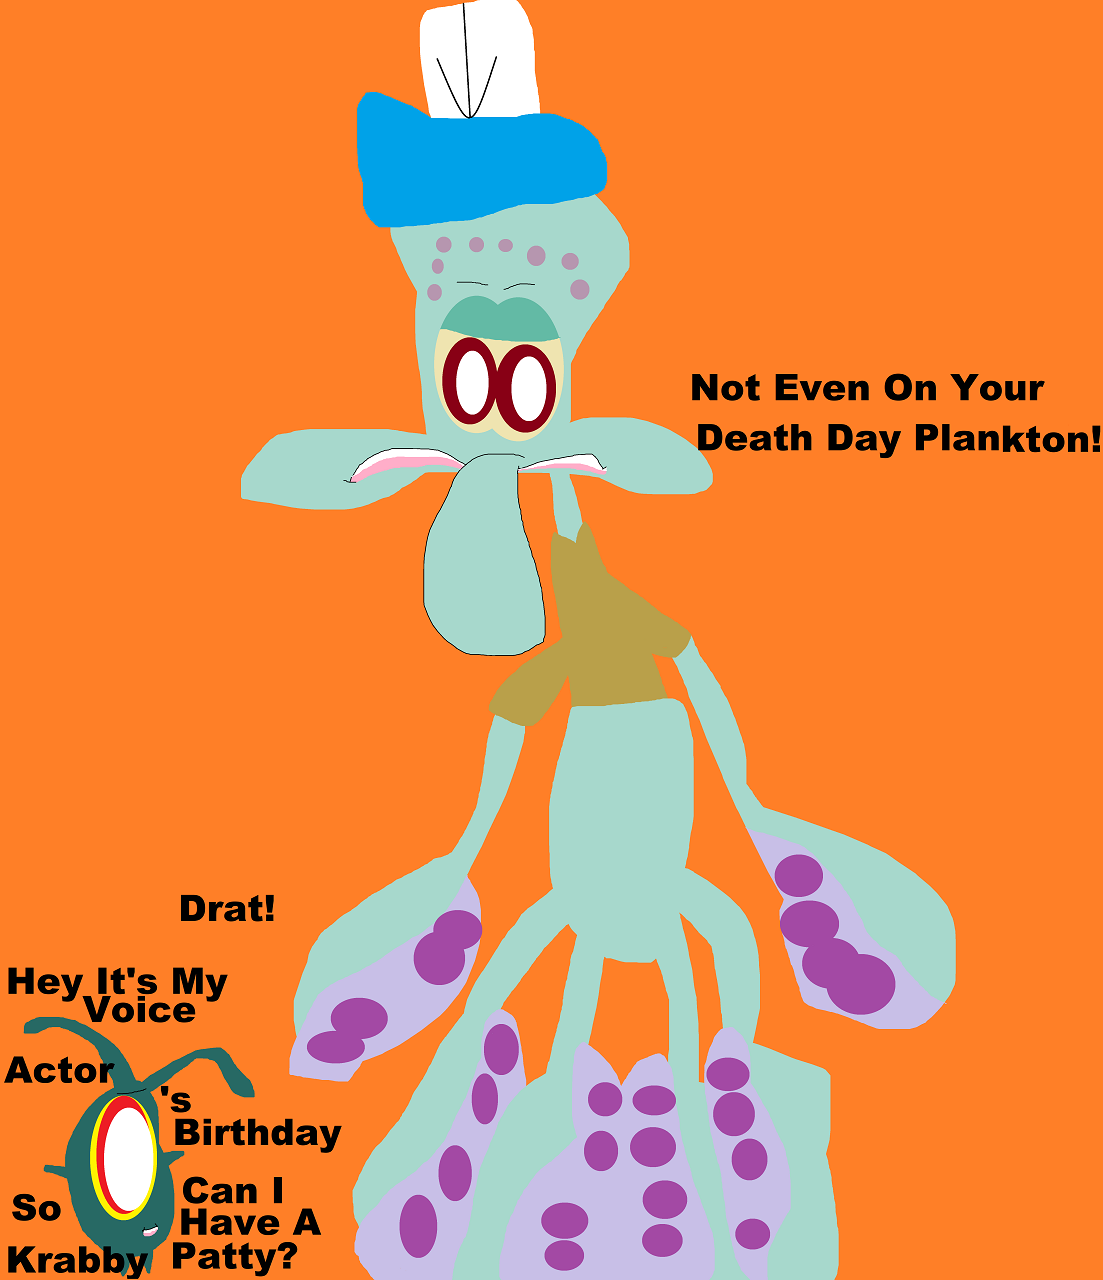 Not Even On Your Death Day Plankton by Falconlobo